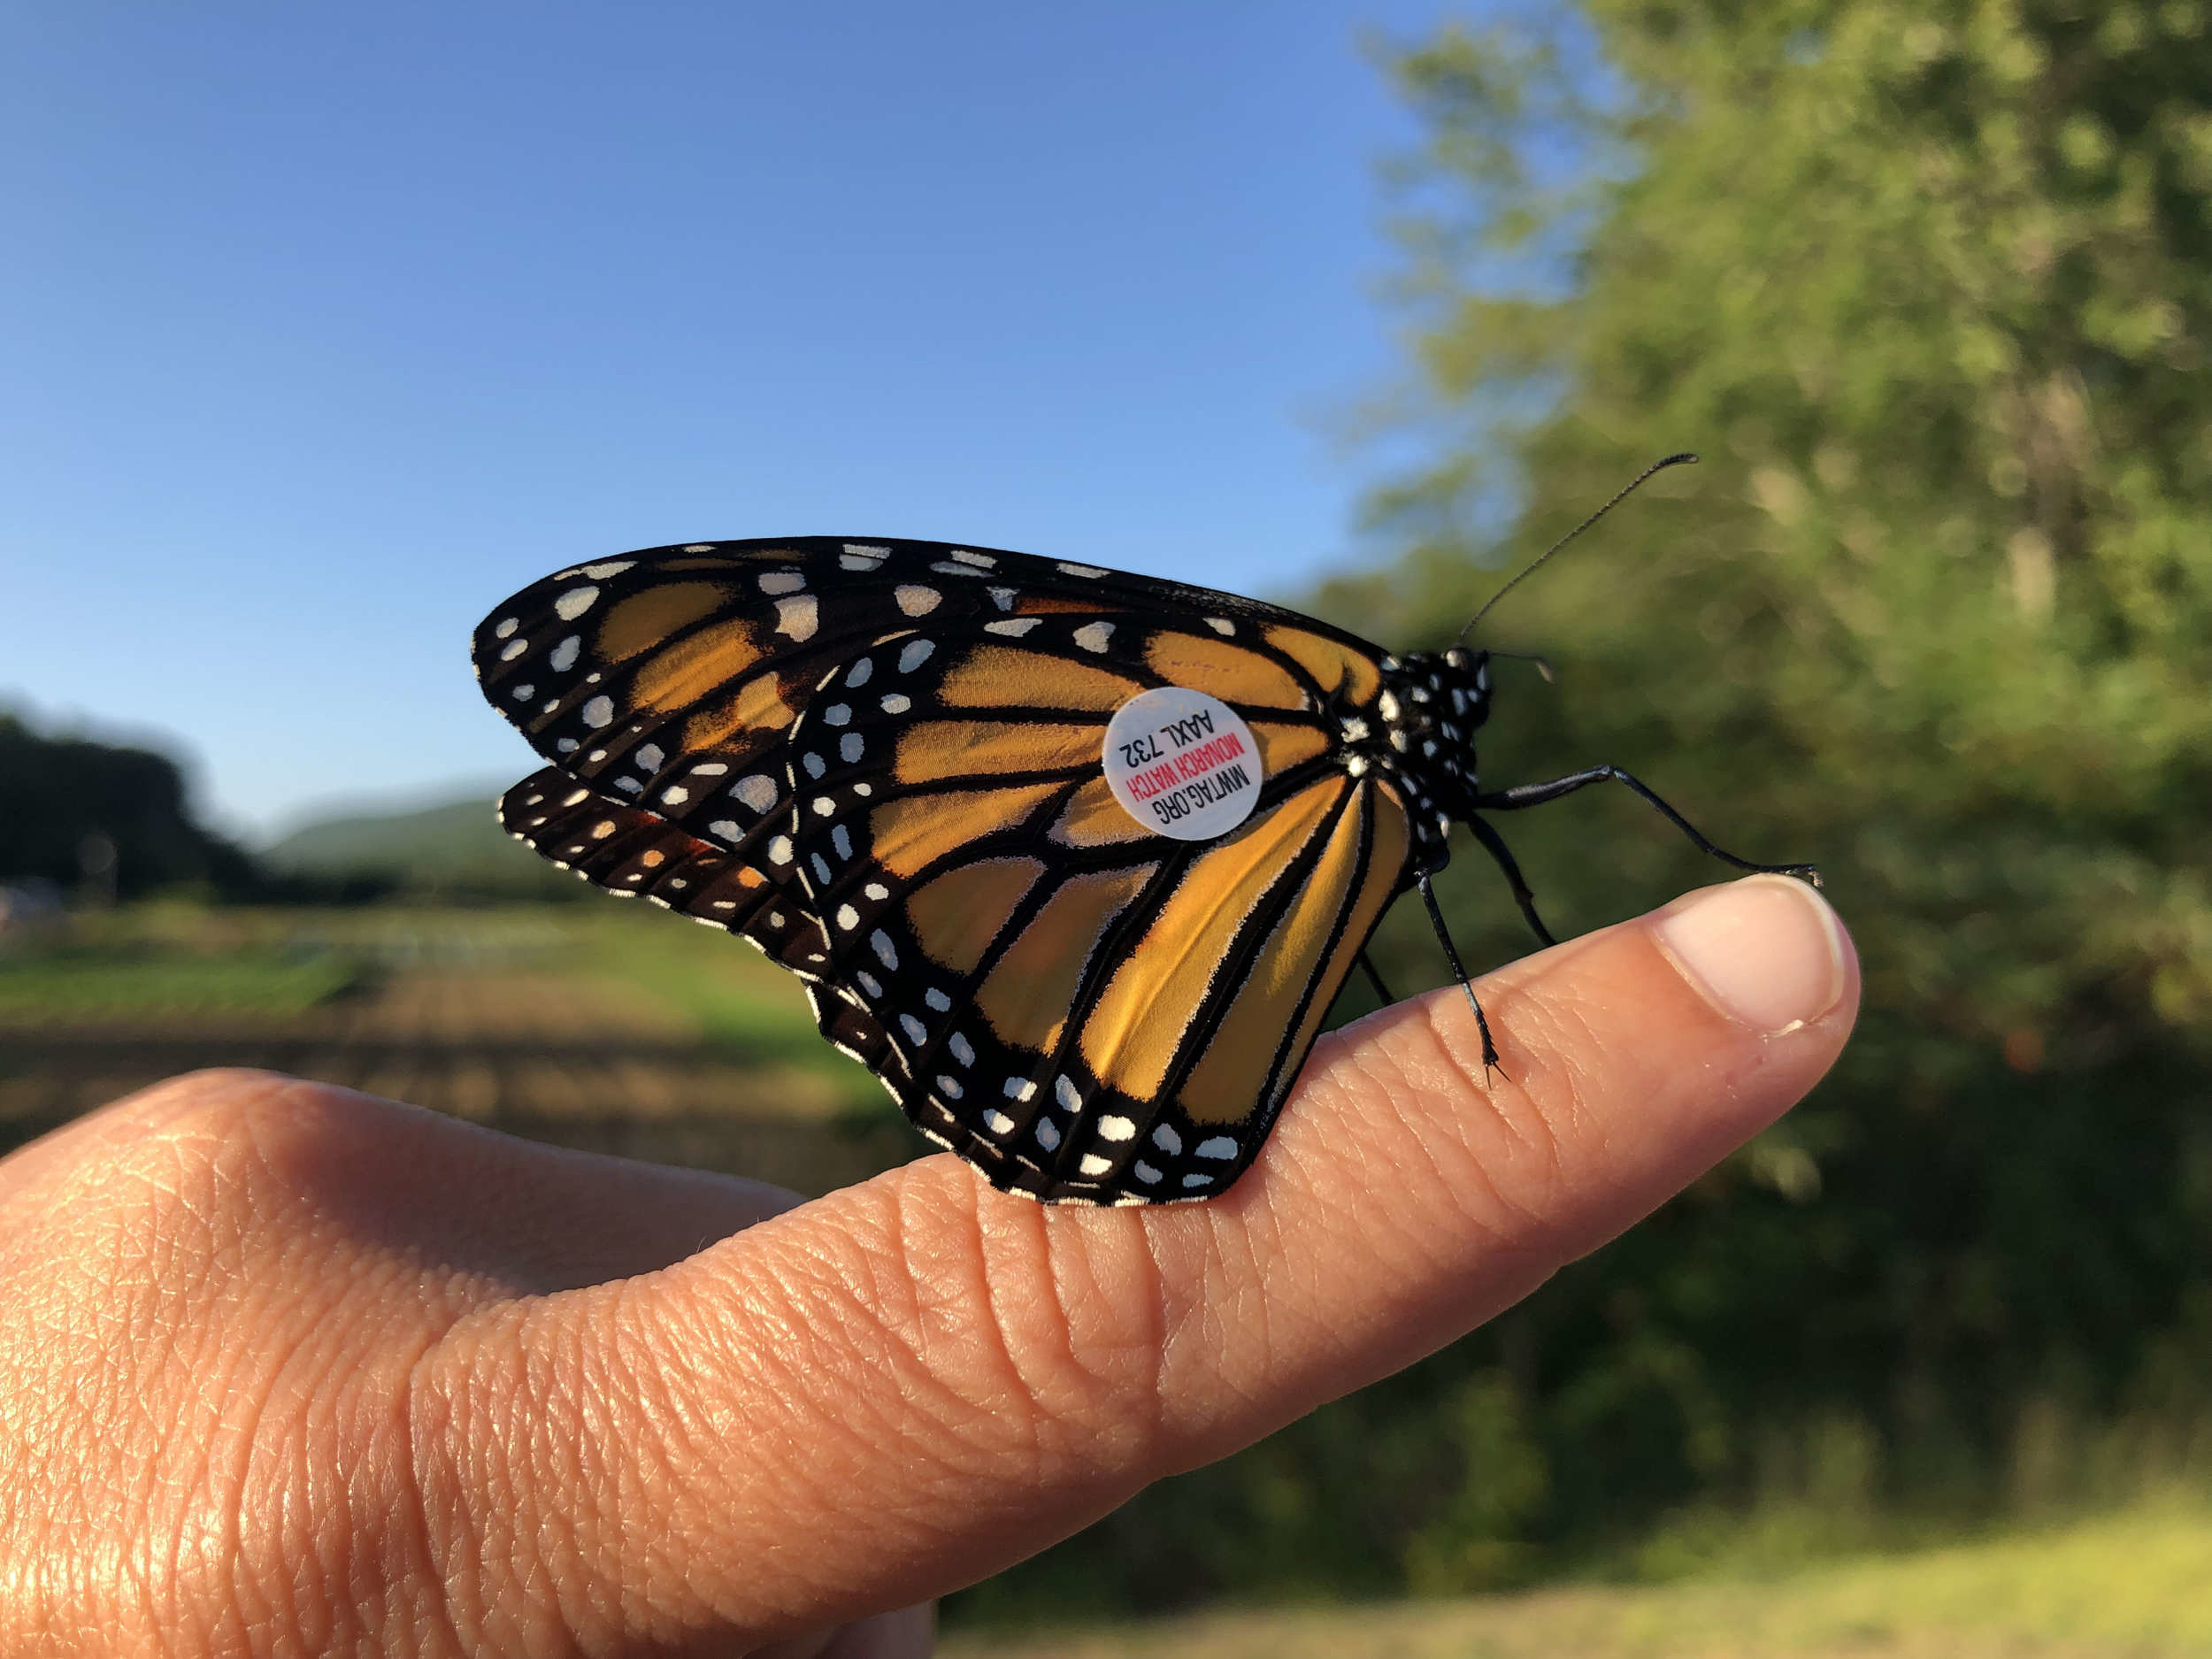 A monarch butterfly with a small sticker on its wing rests on a person's finger. (photo © Brett Amy Thelen)